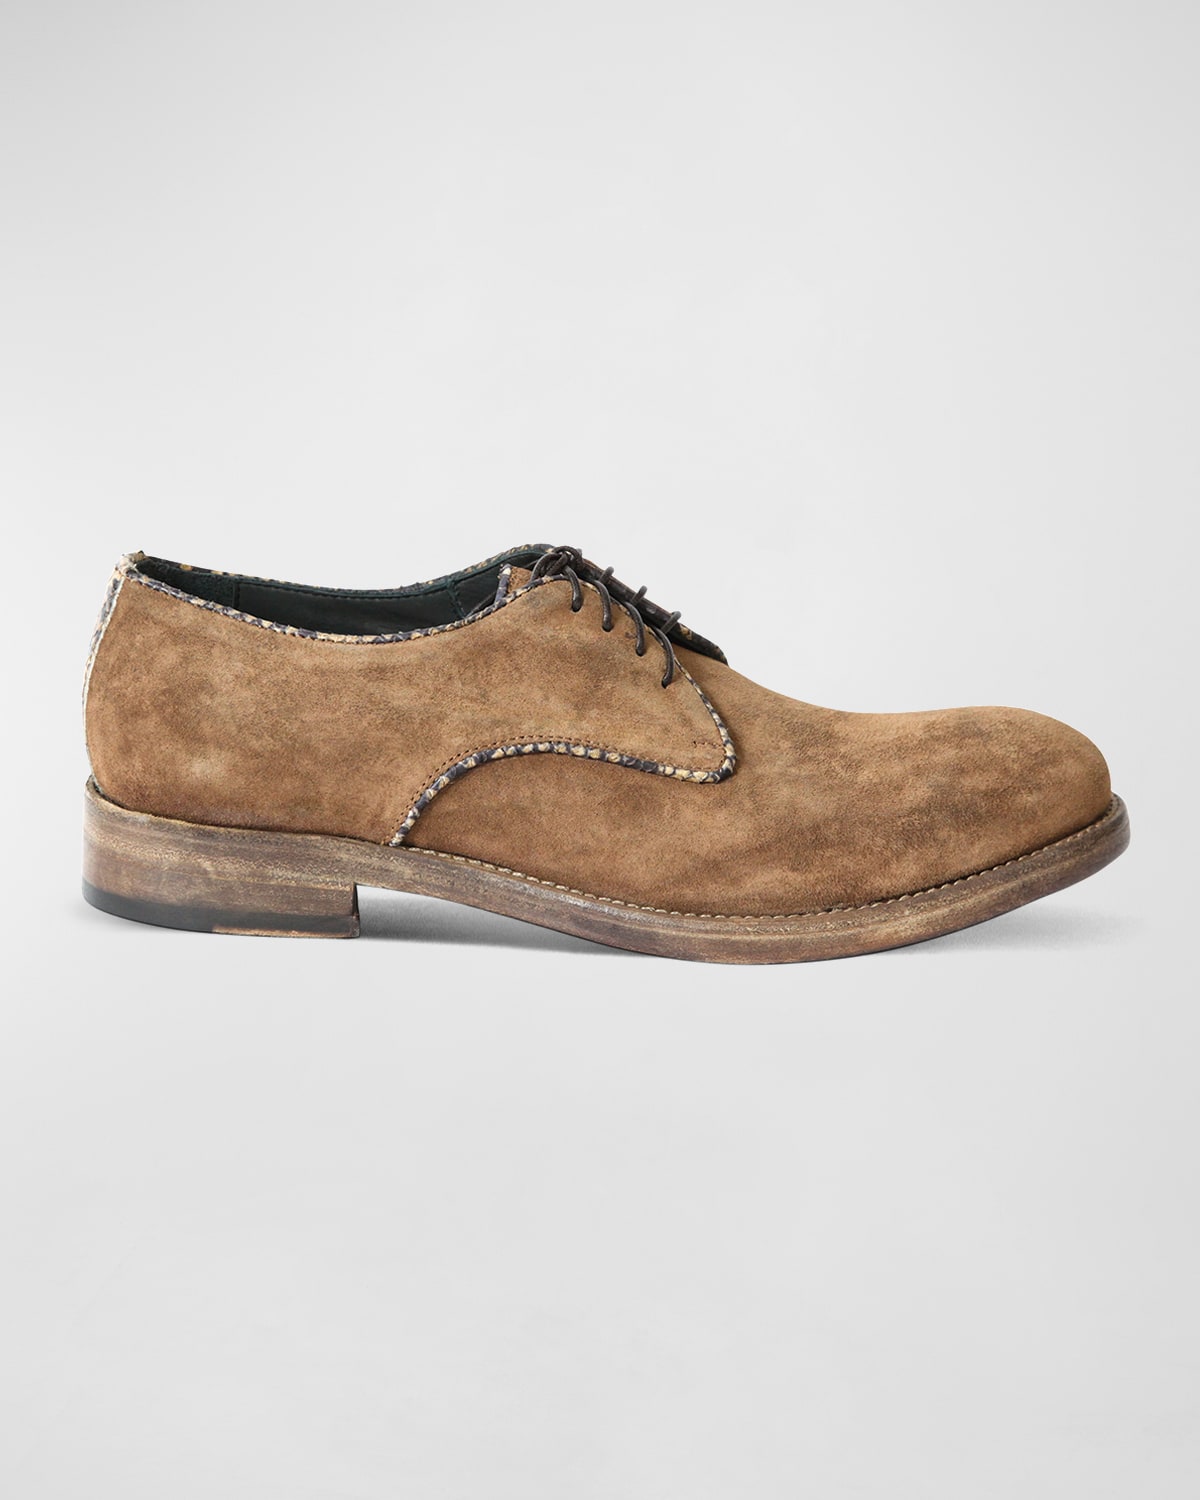 Jo Ghost Men's Washed Suede & Python Derby Shoes